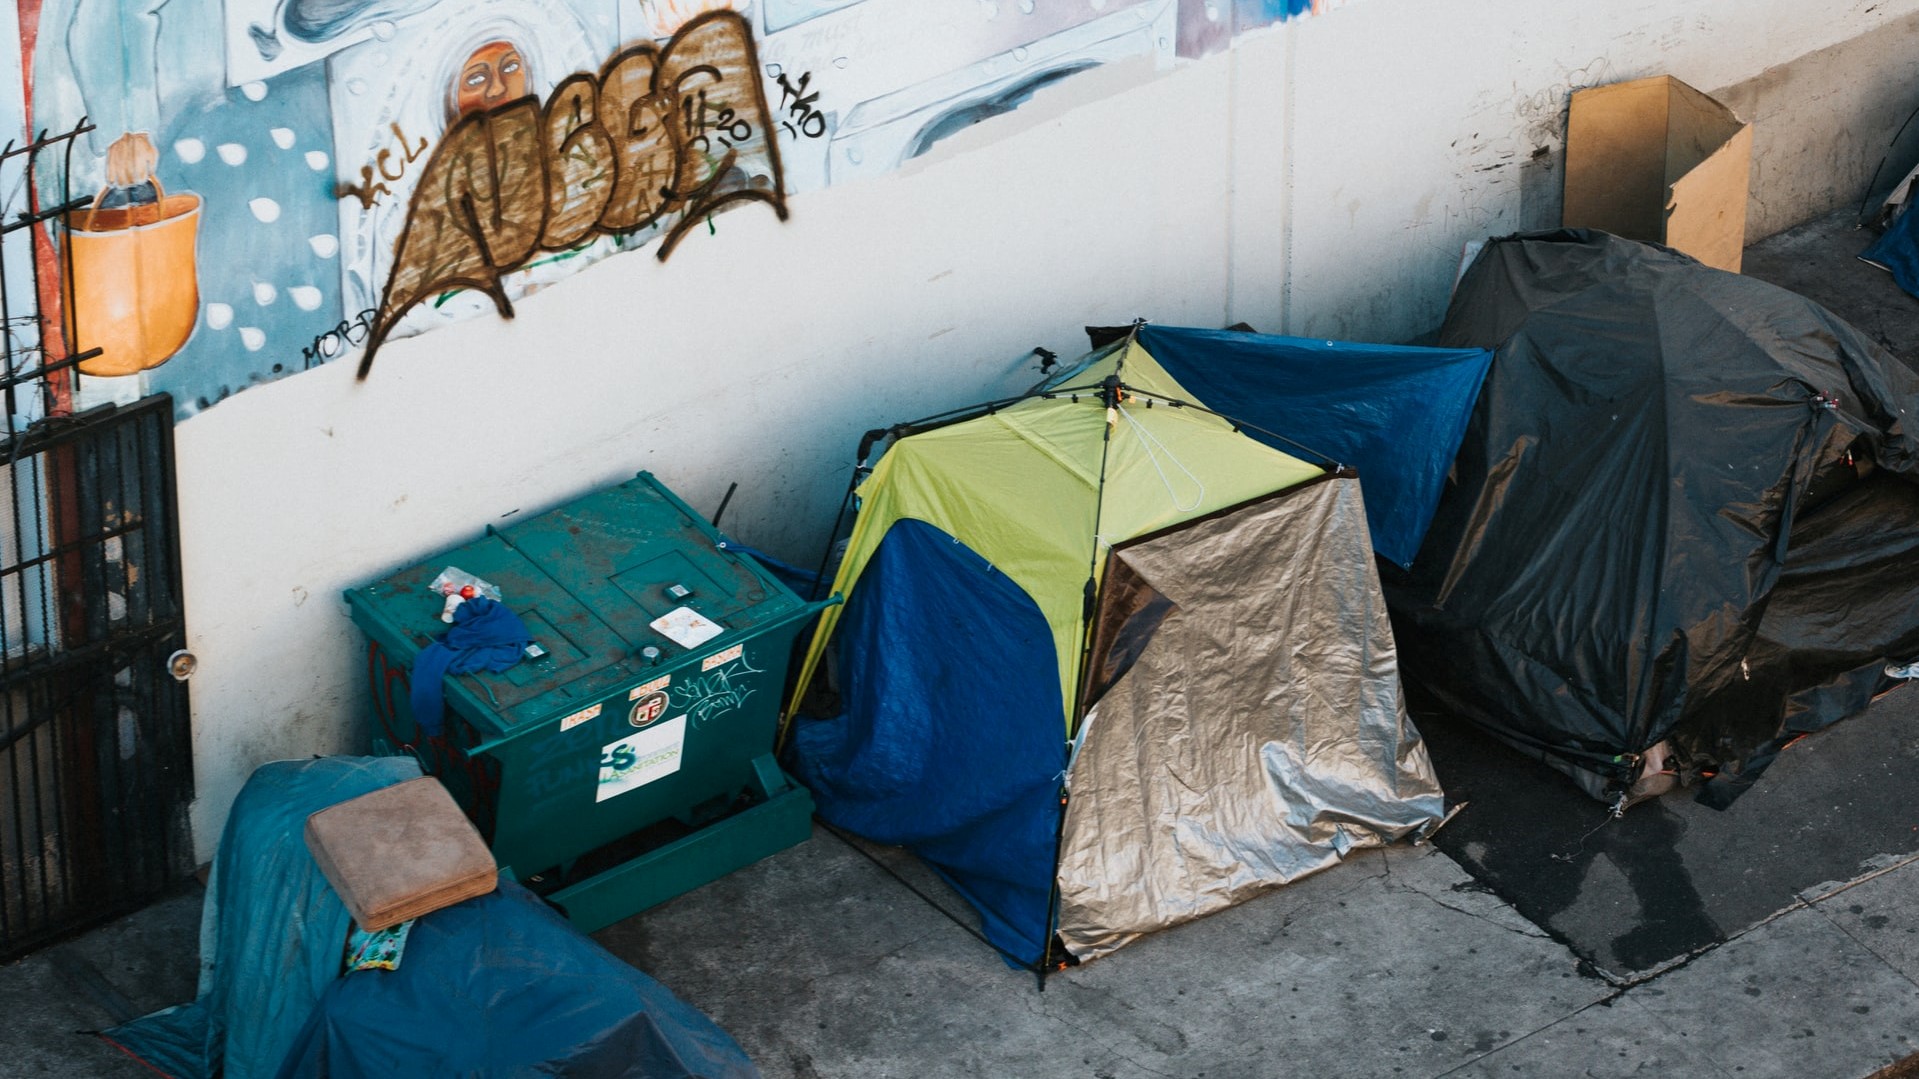 Photo of Homeless Tents on City Street